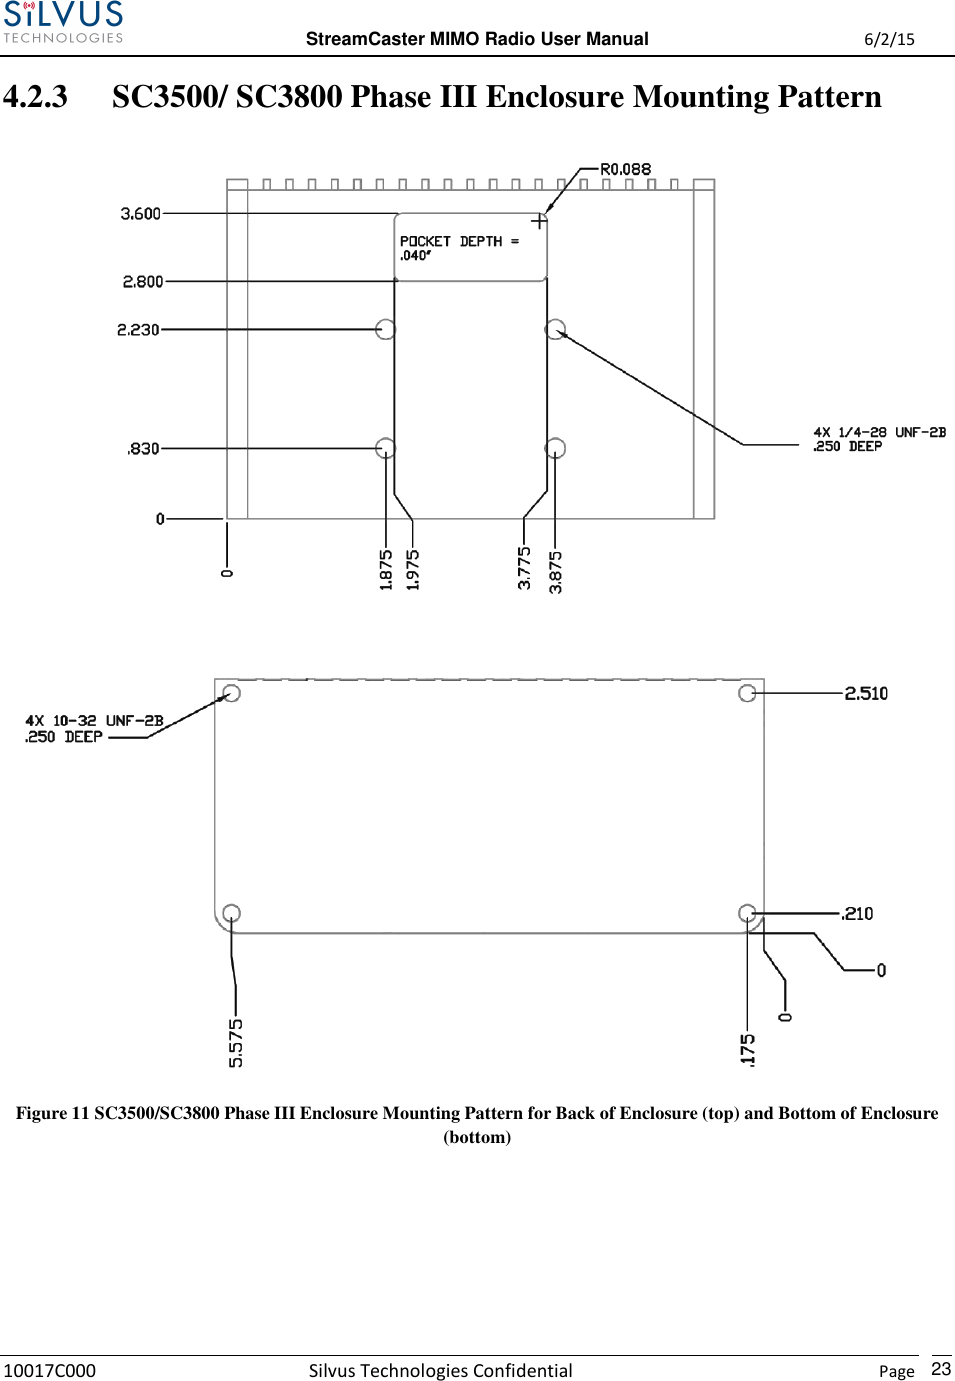  StreamCaster MIMO Radio User Manual  6/2/15 10017C000 Silvus Technologies Confidential    Page   23 4.2.3 SC3500/ SC3800 Phase III Enclosure Mounting Pattern   Figure 11 SC3500/SC3800 Phase III Enclosure Mounting Pattern for Back of Enclosure (top) and Bottom of Enclosure (bottom)   